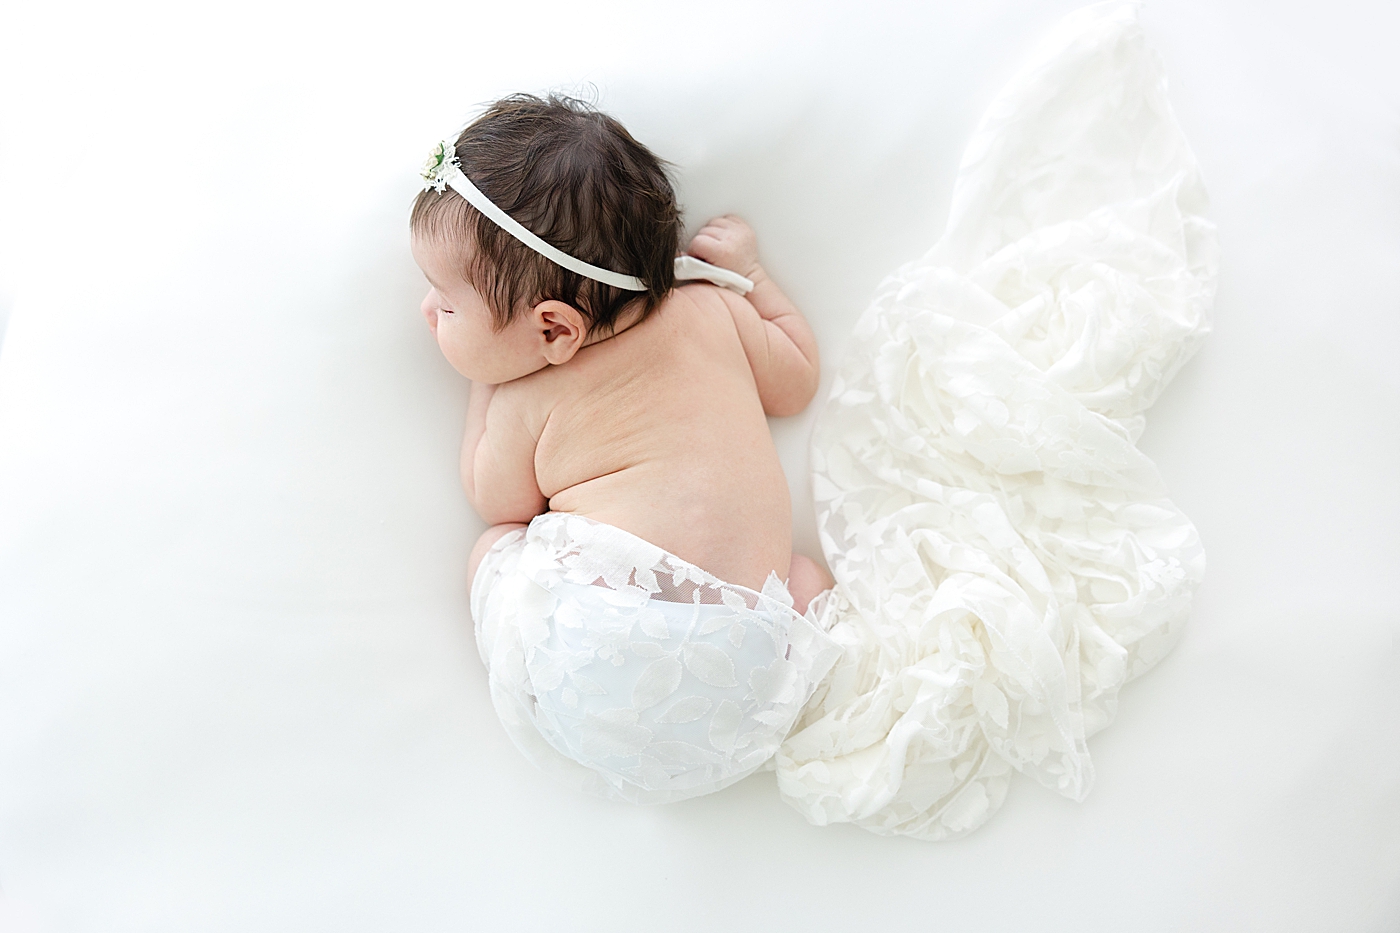 Newborn baby girl wrapped in a white lace swaddle | Photo by Sana Ahmed Photography